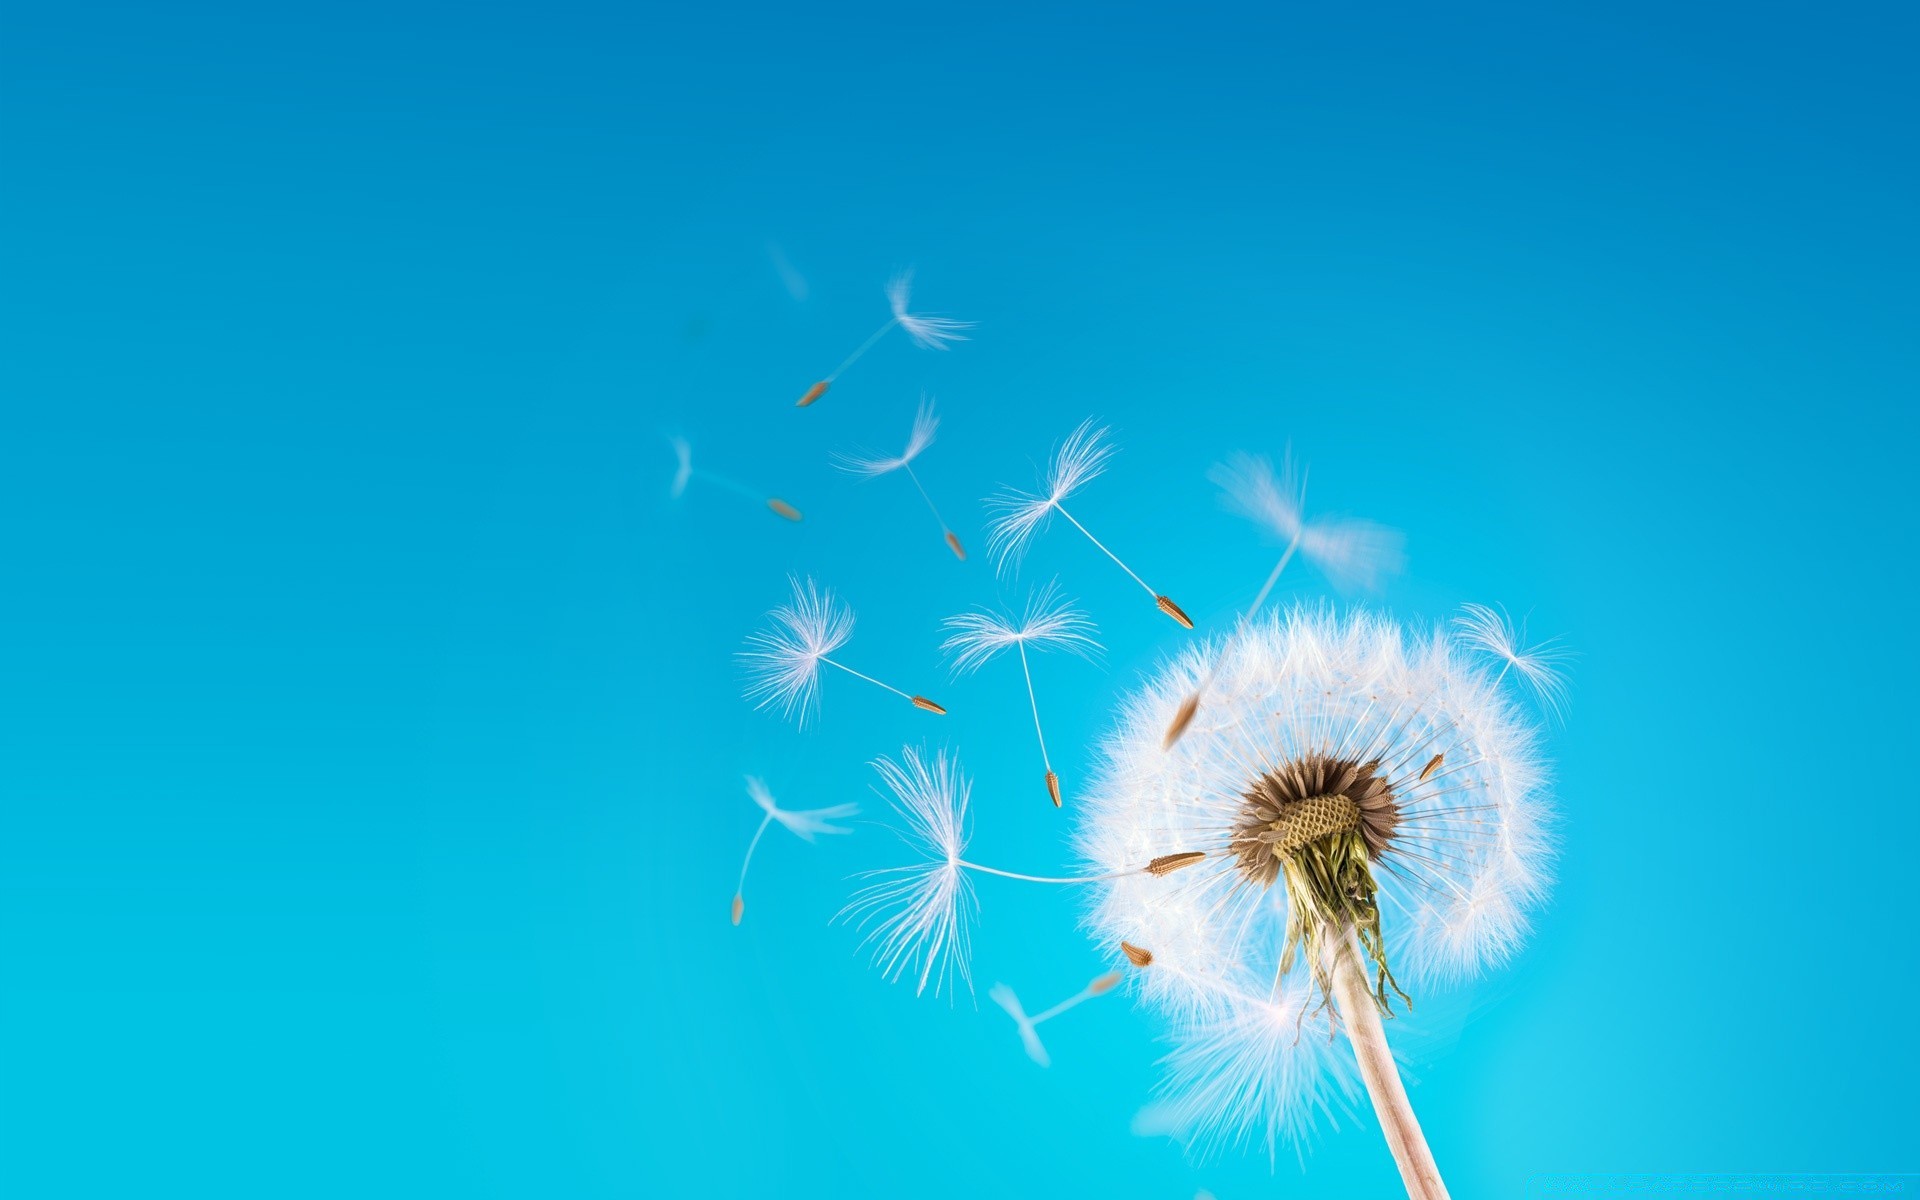 creative dandelion downy sky nature wind summer outdoors softness freedom bright fair weather